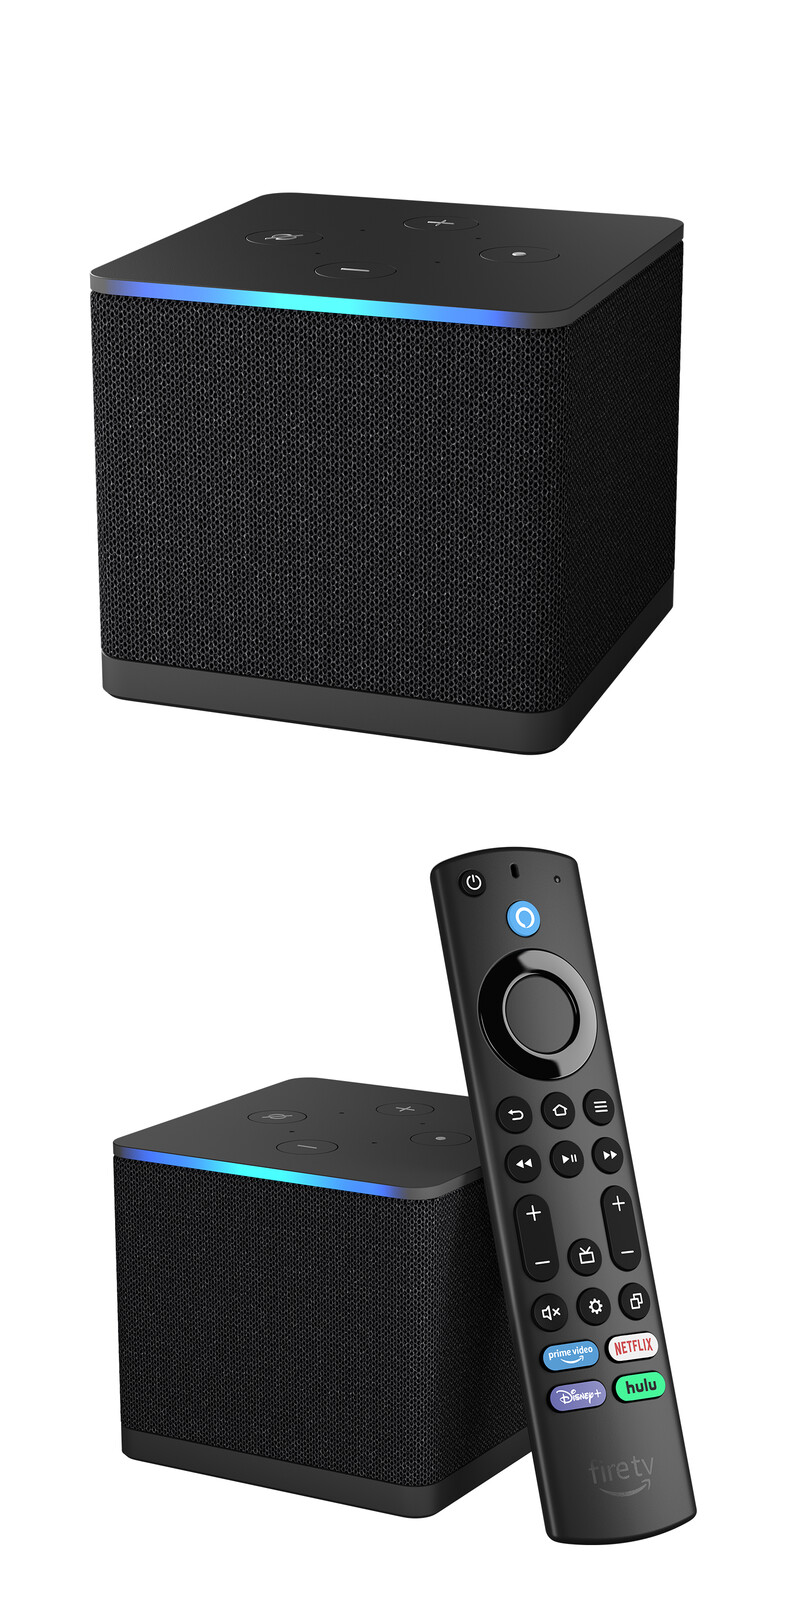 Product render of the Amazon Fire TV Cube. Lighting, compositing, and material creation were made in Cinema4D